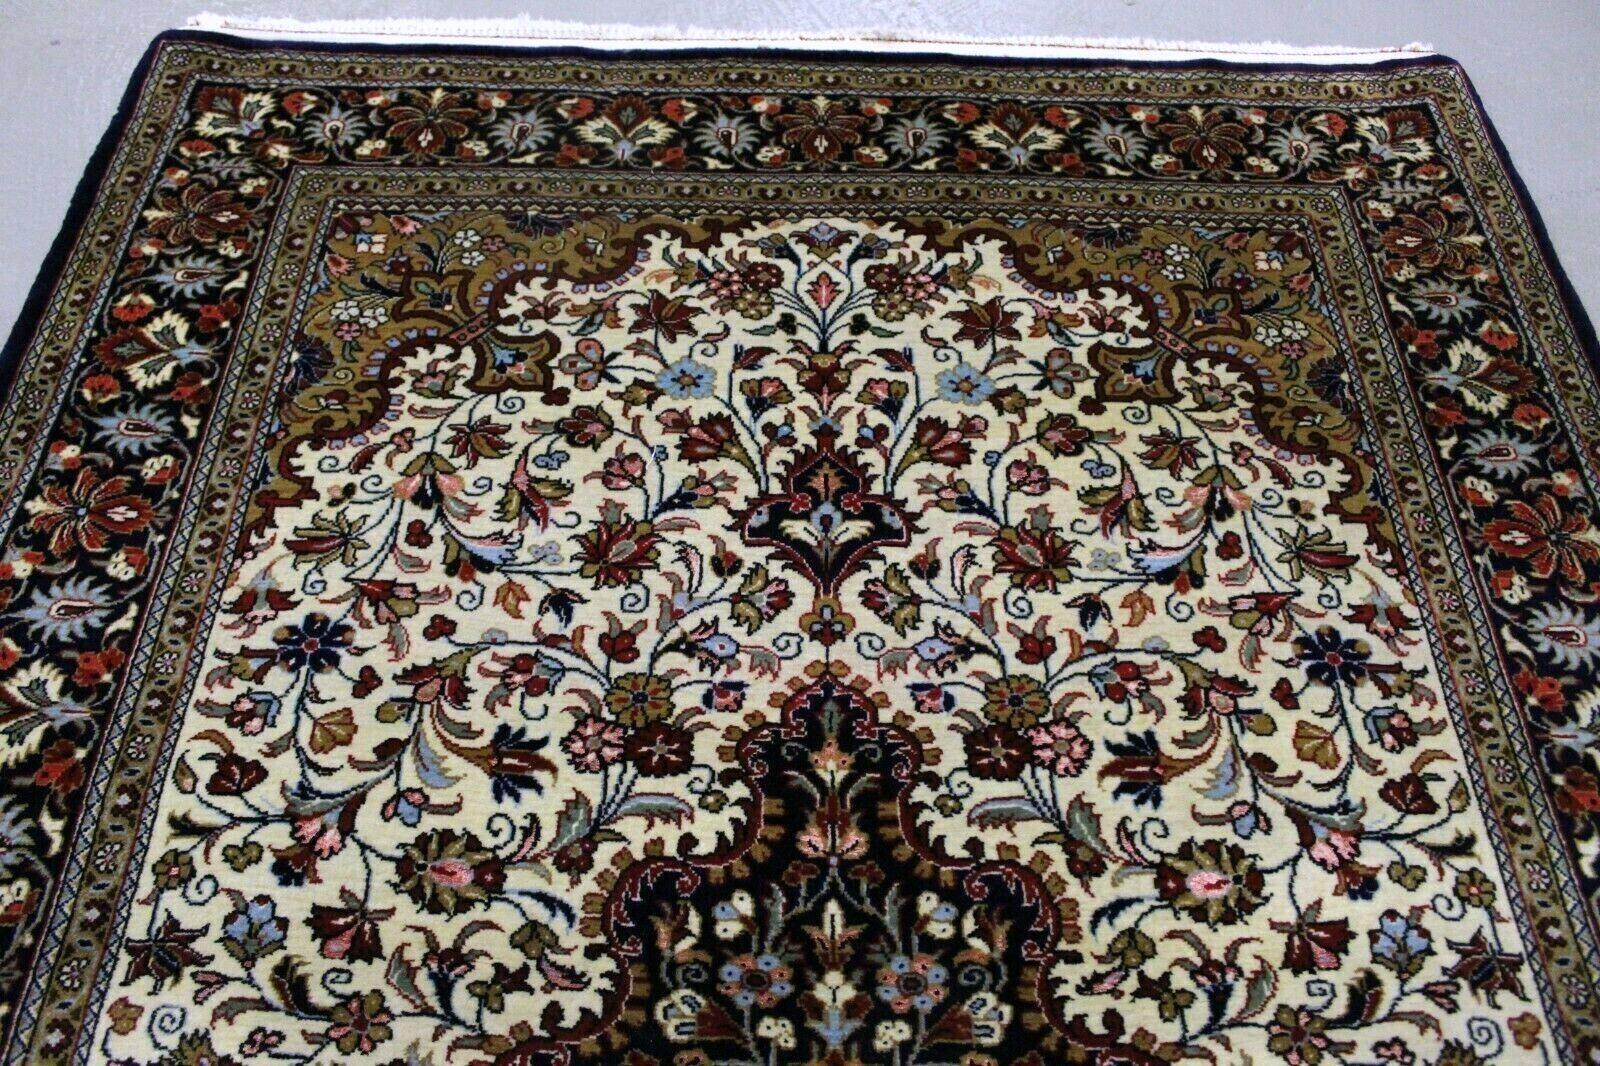  Introducing our exquisite Handmade Vintage Persian Style Qum Rug, a captivating piece that brings timeless elegance to any space. Measuring approximately 3.7’ x 5.1’ (115cm x 156cm), this rug from the 1970s is meticulously crafted from the finest